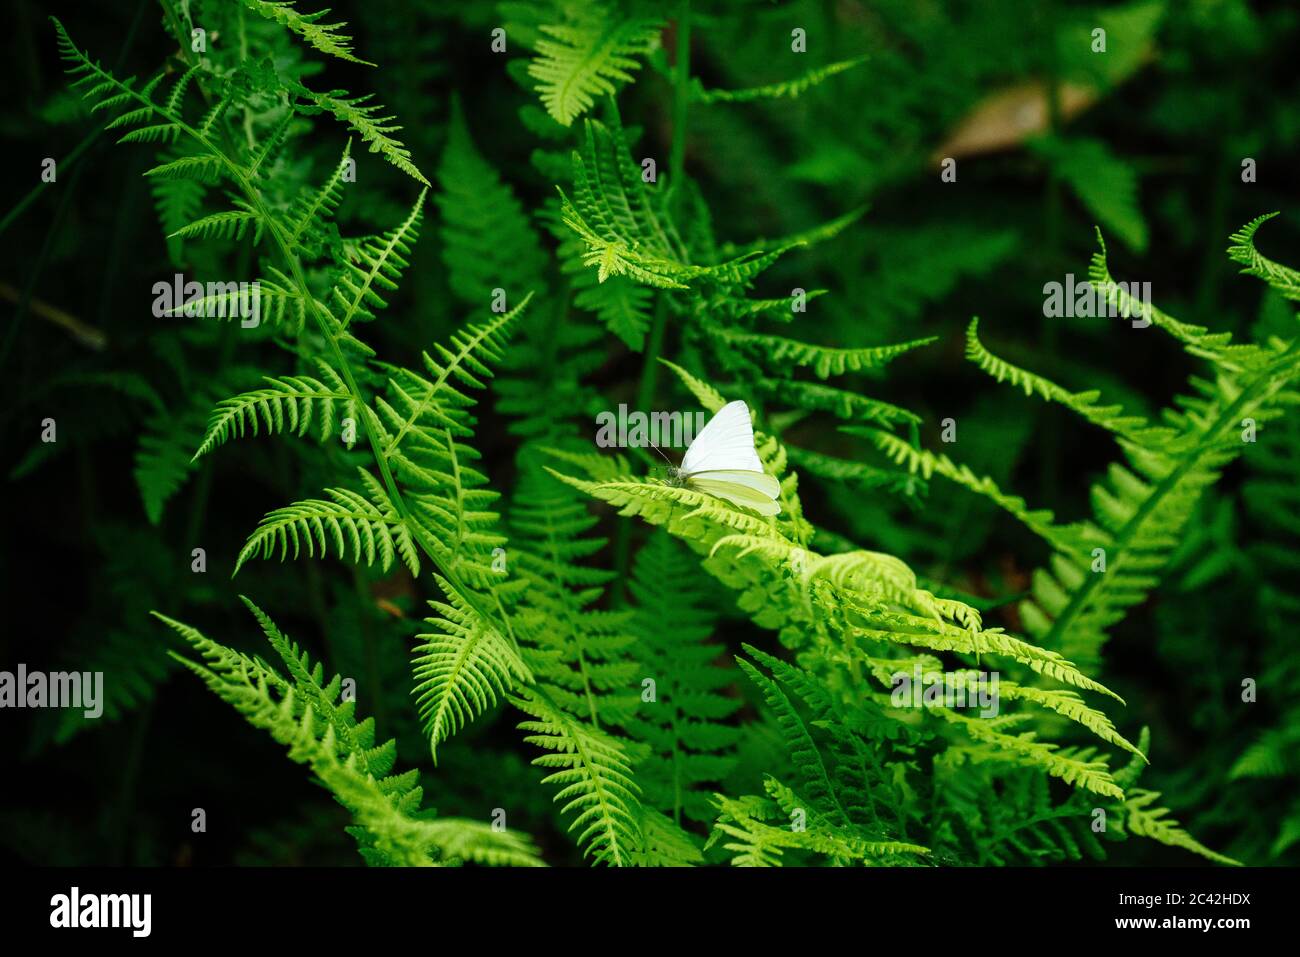 Wide angle view of a white butterfly on a fern leaf Stock Photo